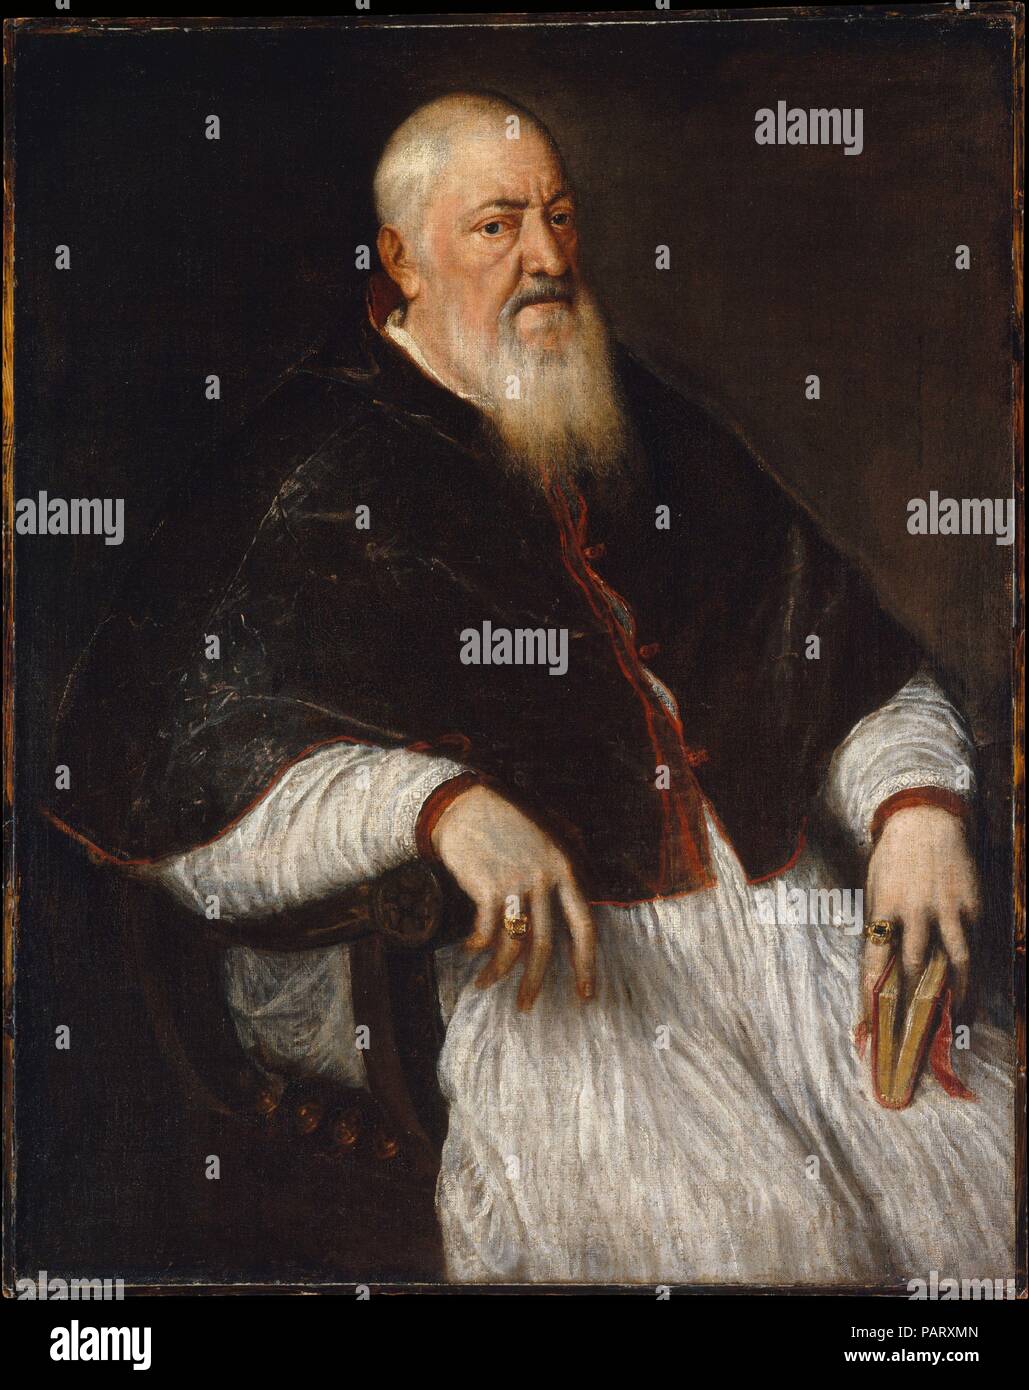 Filippo Archinto (born about 1500, died 1558), Archbishop of Milan. Artist: Titian (Tiziano Vecellio) (Italian, Pieve di Cadore ca. 1485/90?-1576 Venice). Dimensions: 46 1/2 x 37 in. (118.1 x 94 cm). Date: mid-1550s.    The Milanese Filippo Archinto was a remarkable Catholic cleric who attended the Council of Trent and zealously fought against heresy. Titian painted him when Archinto served as papal nuncio in Venice. Soon afterwards, he was confirmed as Archbishop of Milan, but intrigue worthy of the theater kept him from taking up his role and he died in exile. Titian's portrayal of him is su Stock Photo